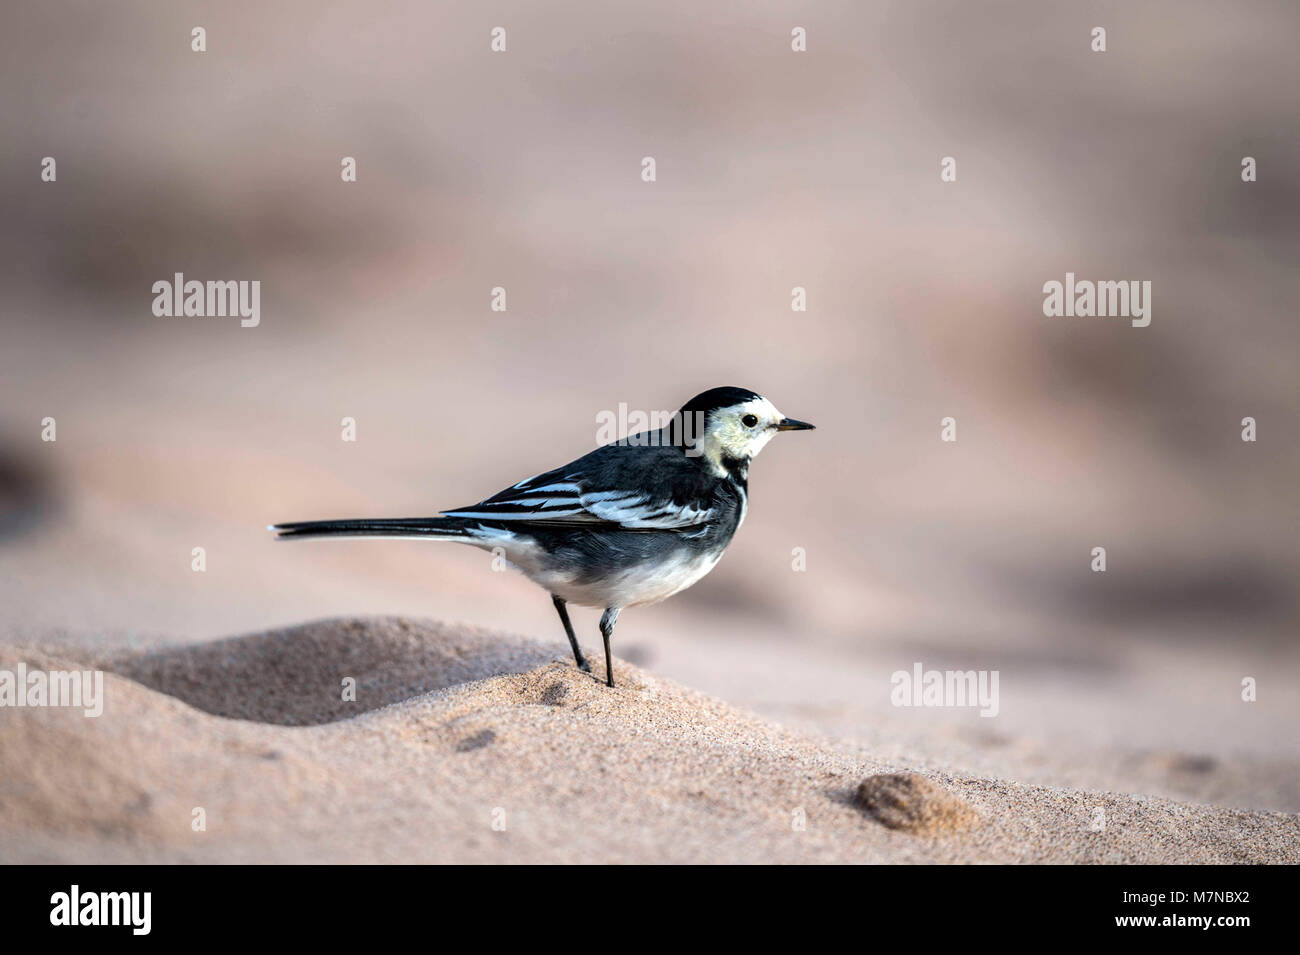 Pied Wagtail (Motacilla alba) on the beach portrait collection Stock Photo